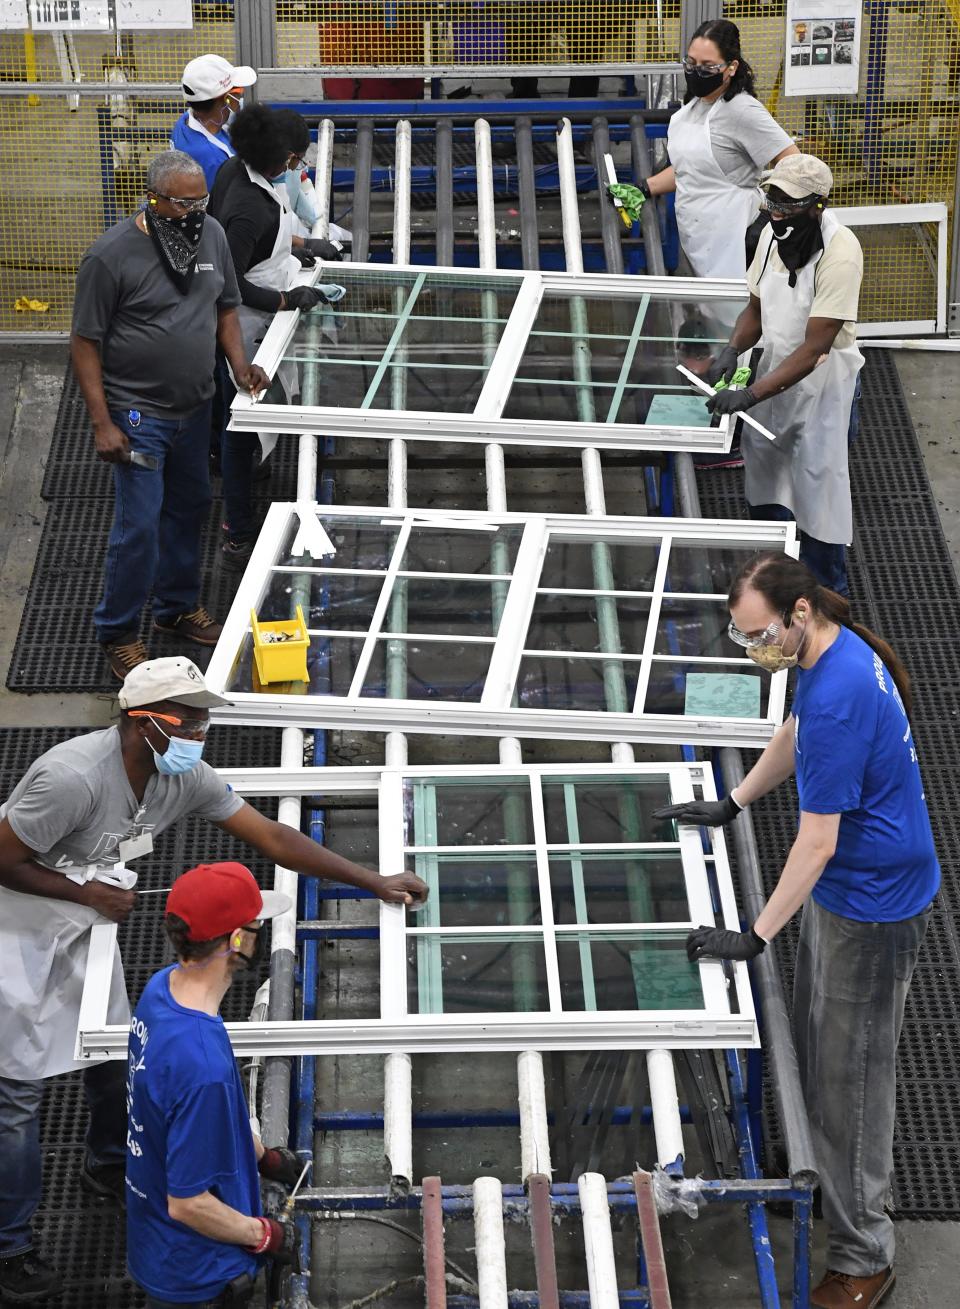 Workers assemble windows at PGT Innovations in 2021.